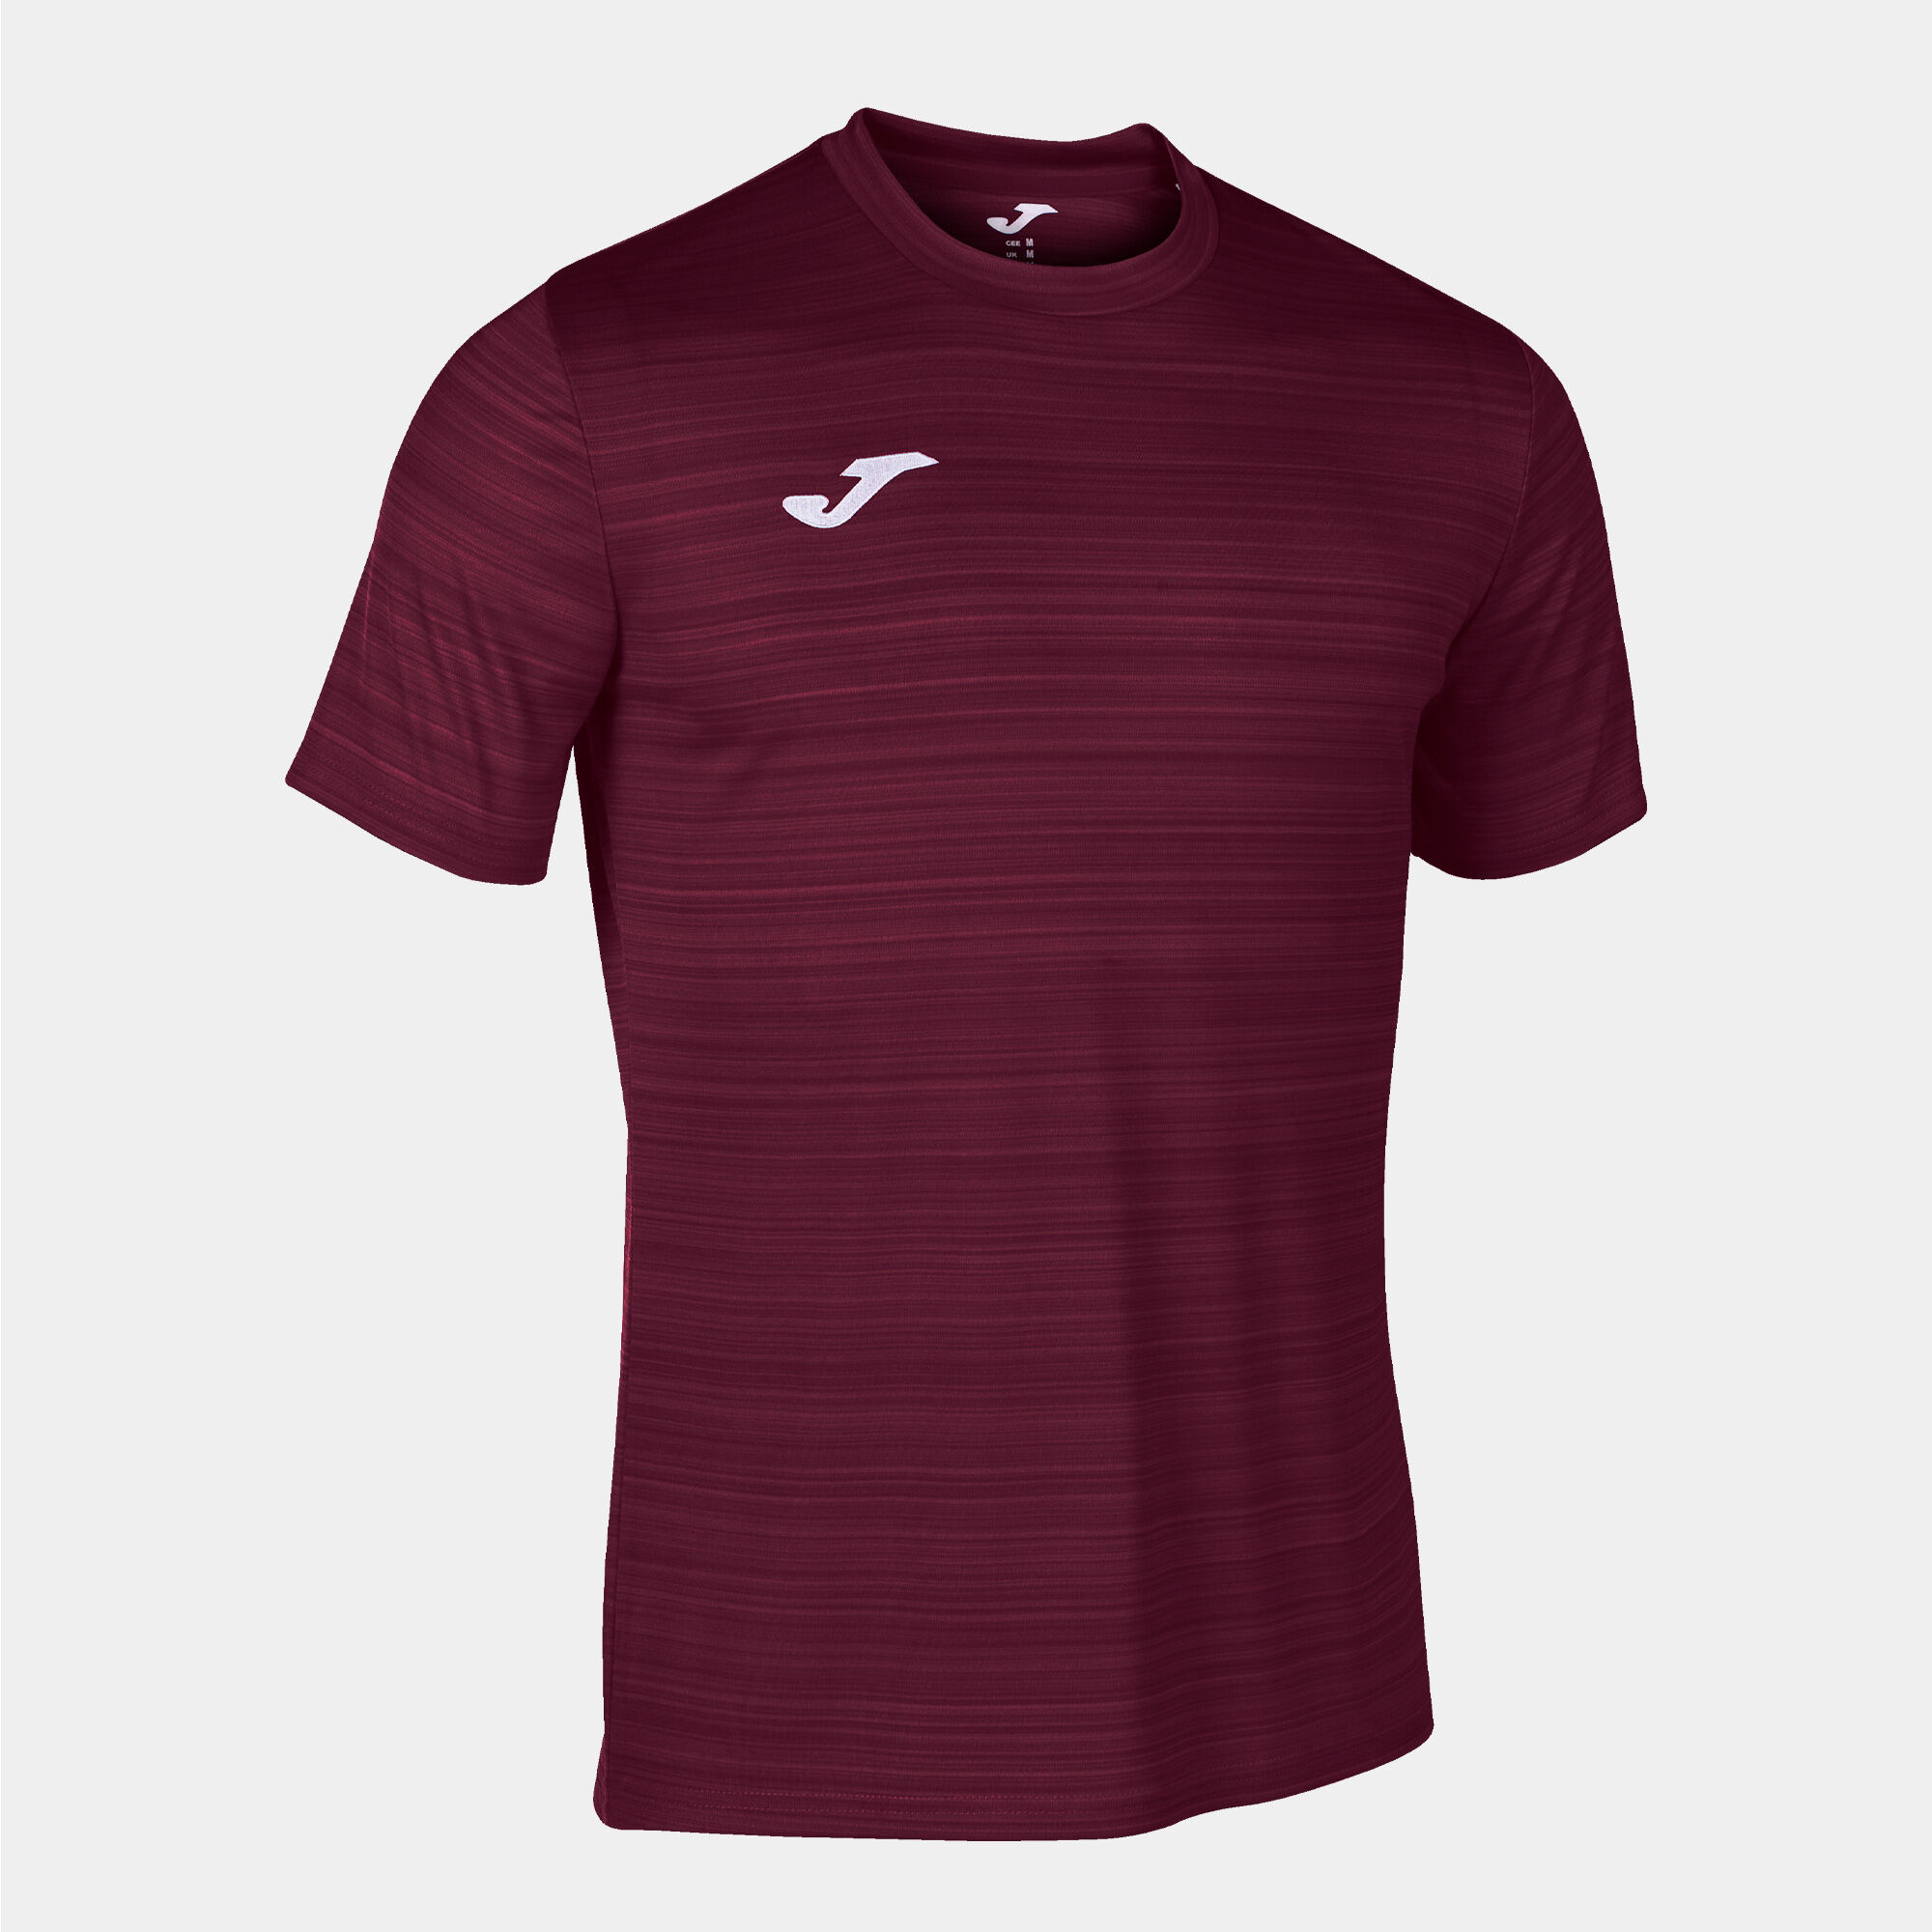 MAILLOT MANCHES COURTES HOMME GRAFITY III BORDEAUX